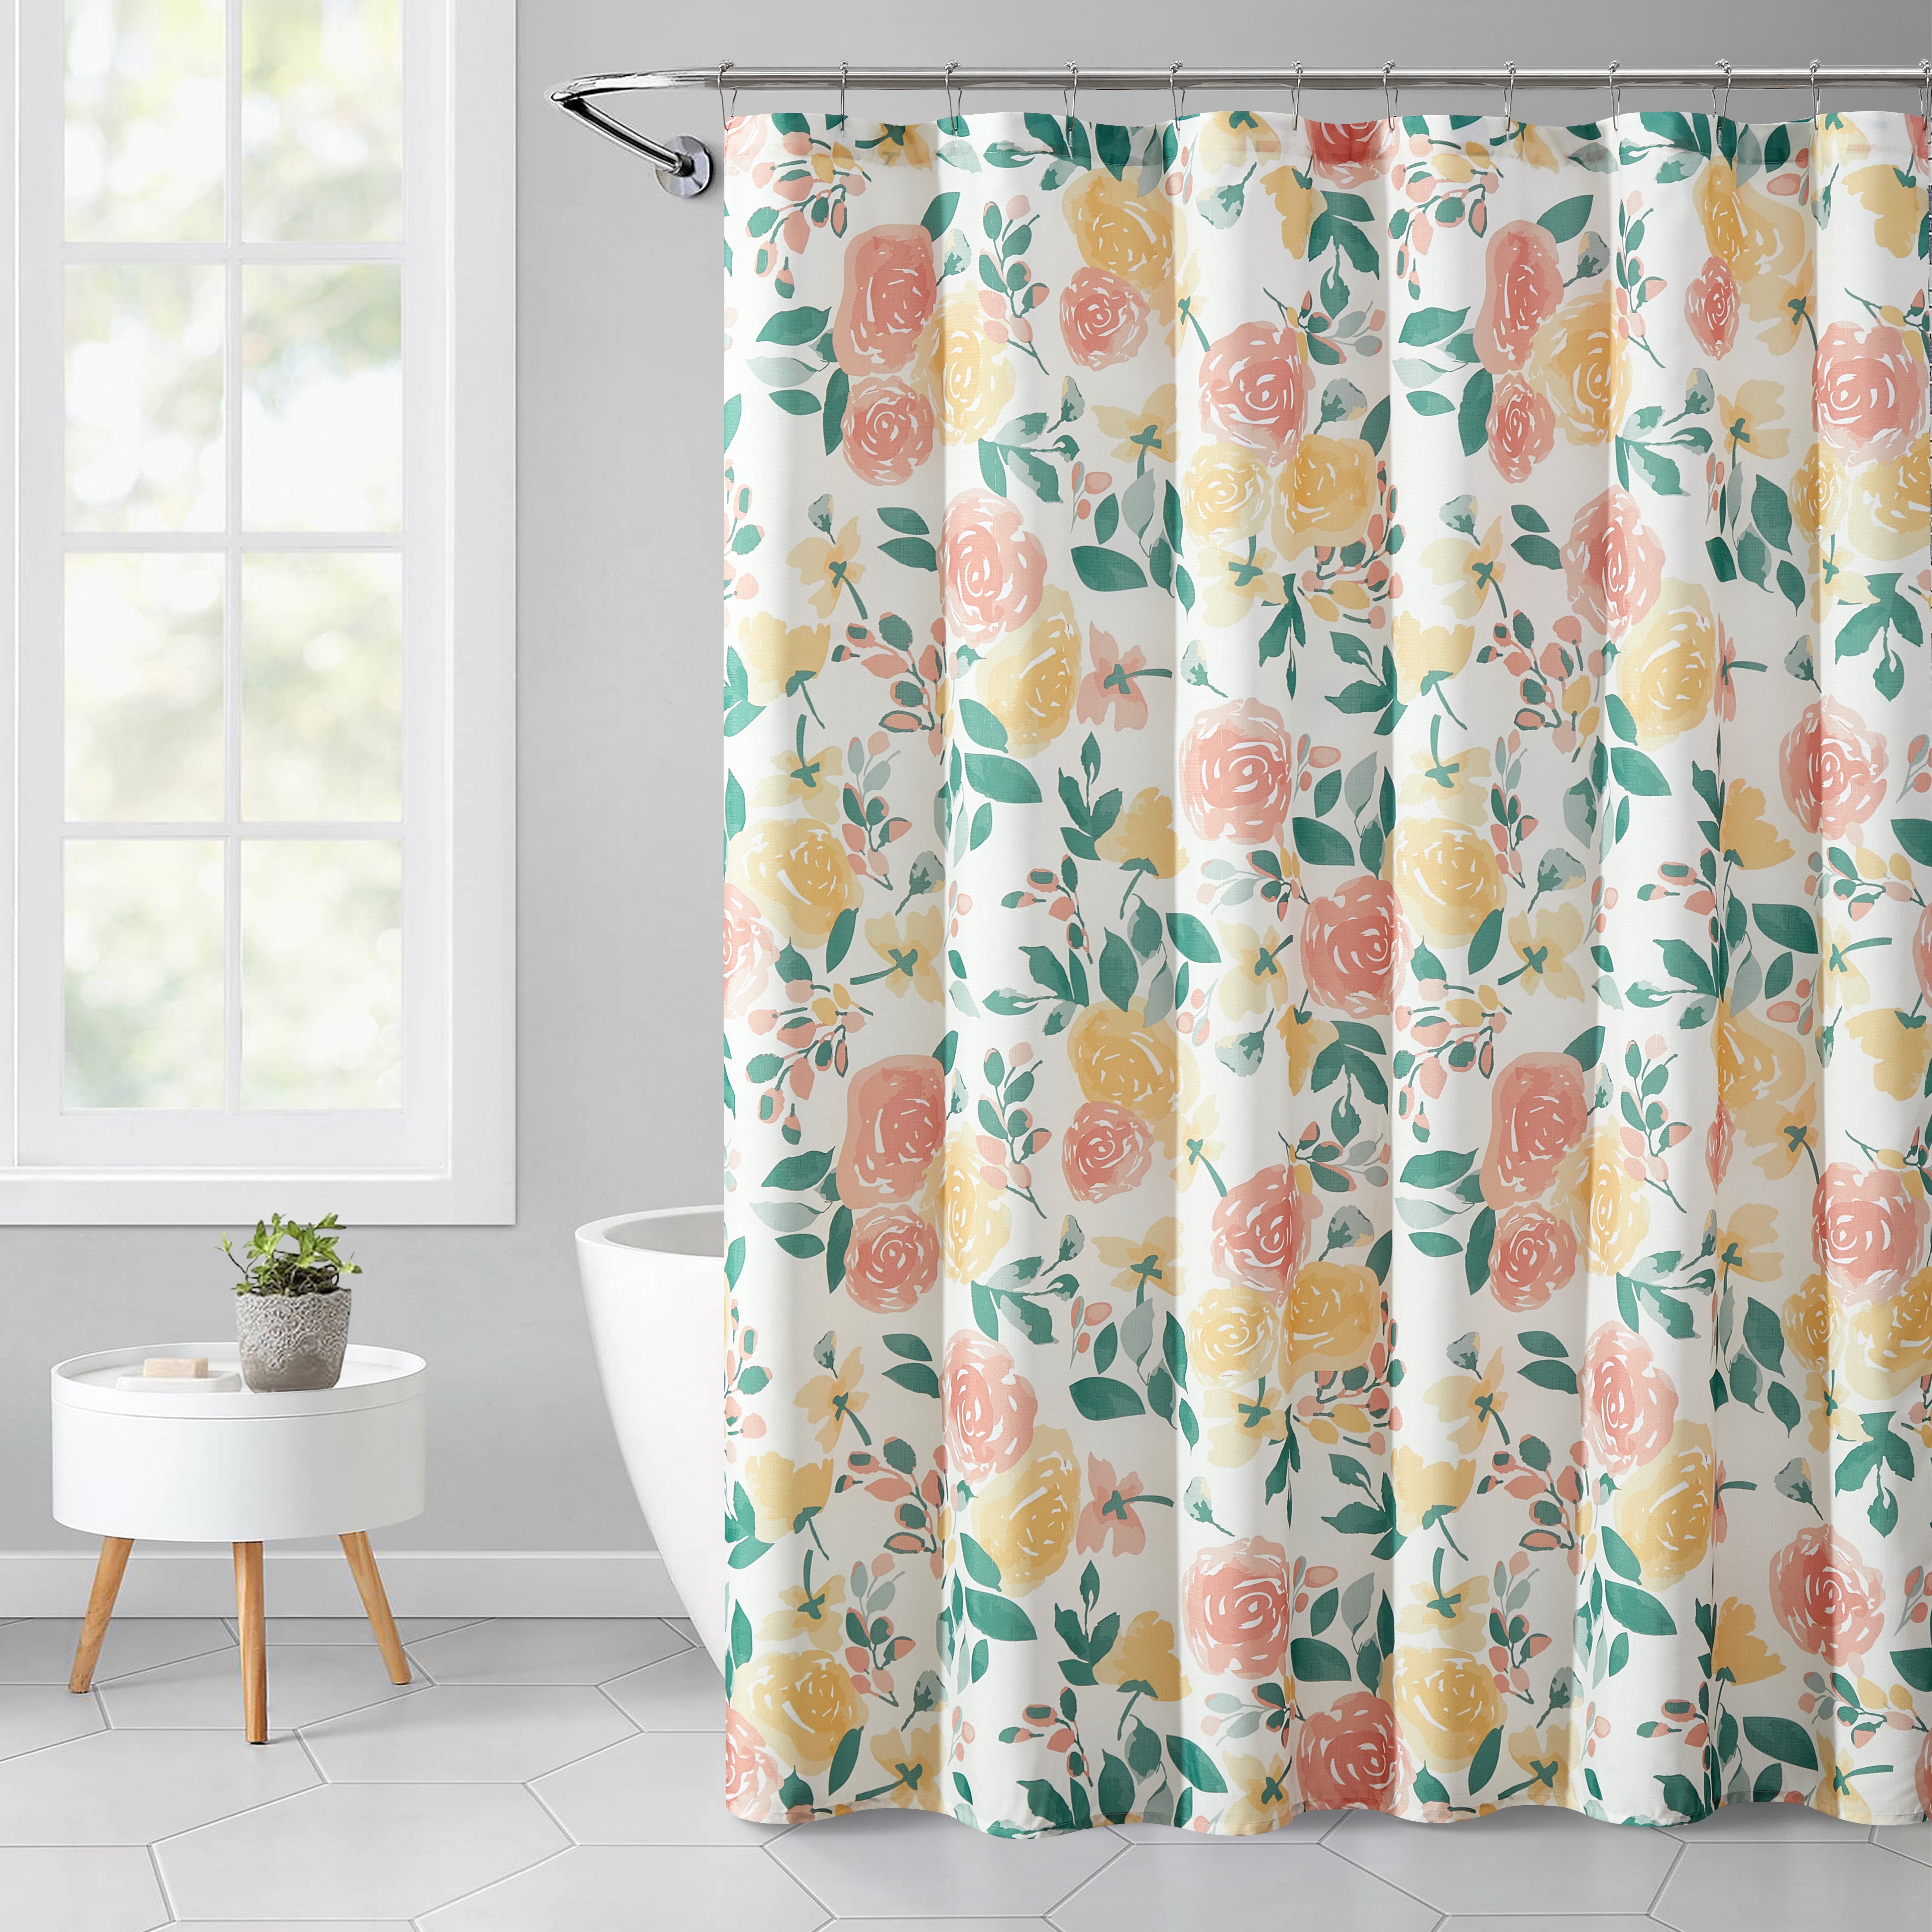 Essential Home Lanai Floral Fabric Shower Curtain   70x72 in 